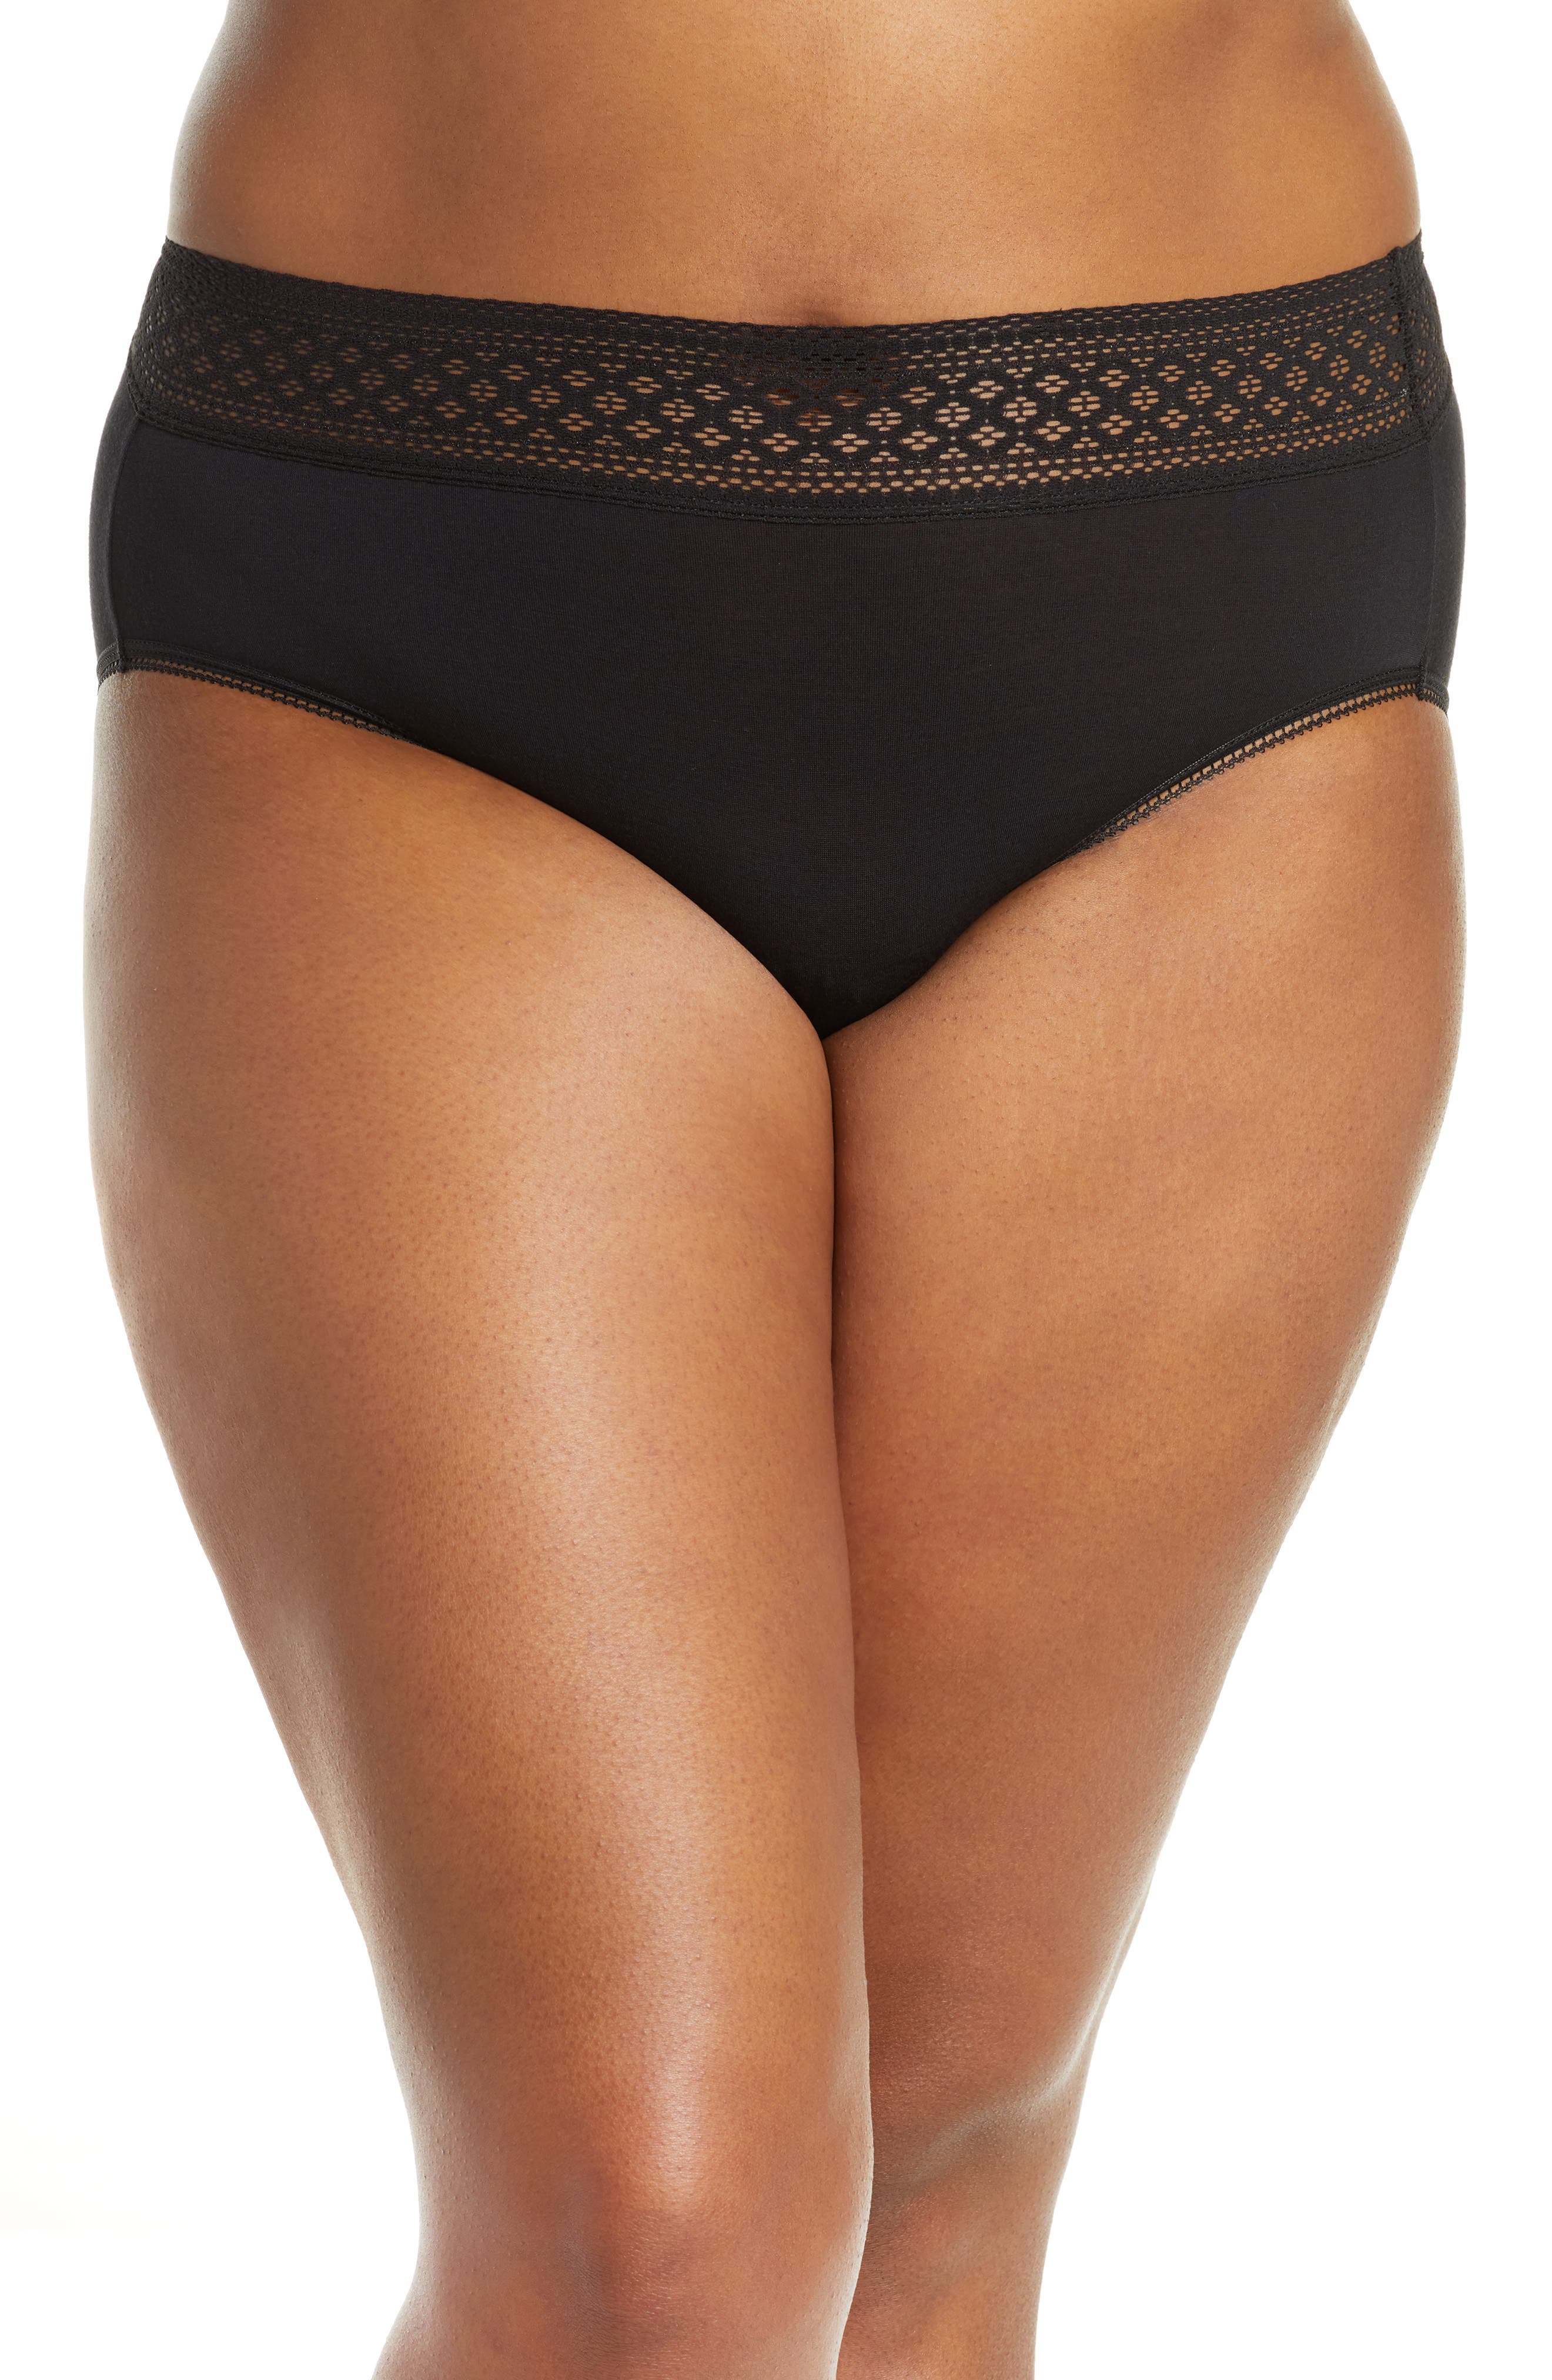 UPC 719544825917 product image for Women's Wacoal Subtle Beauty High Cut Briefs, Size Small - Black | upcitemdb.com